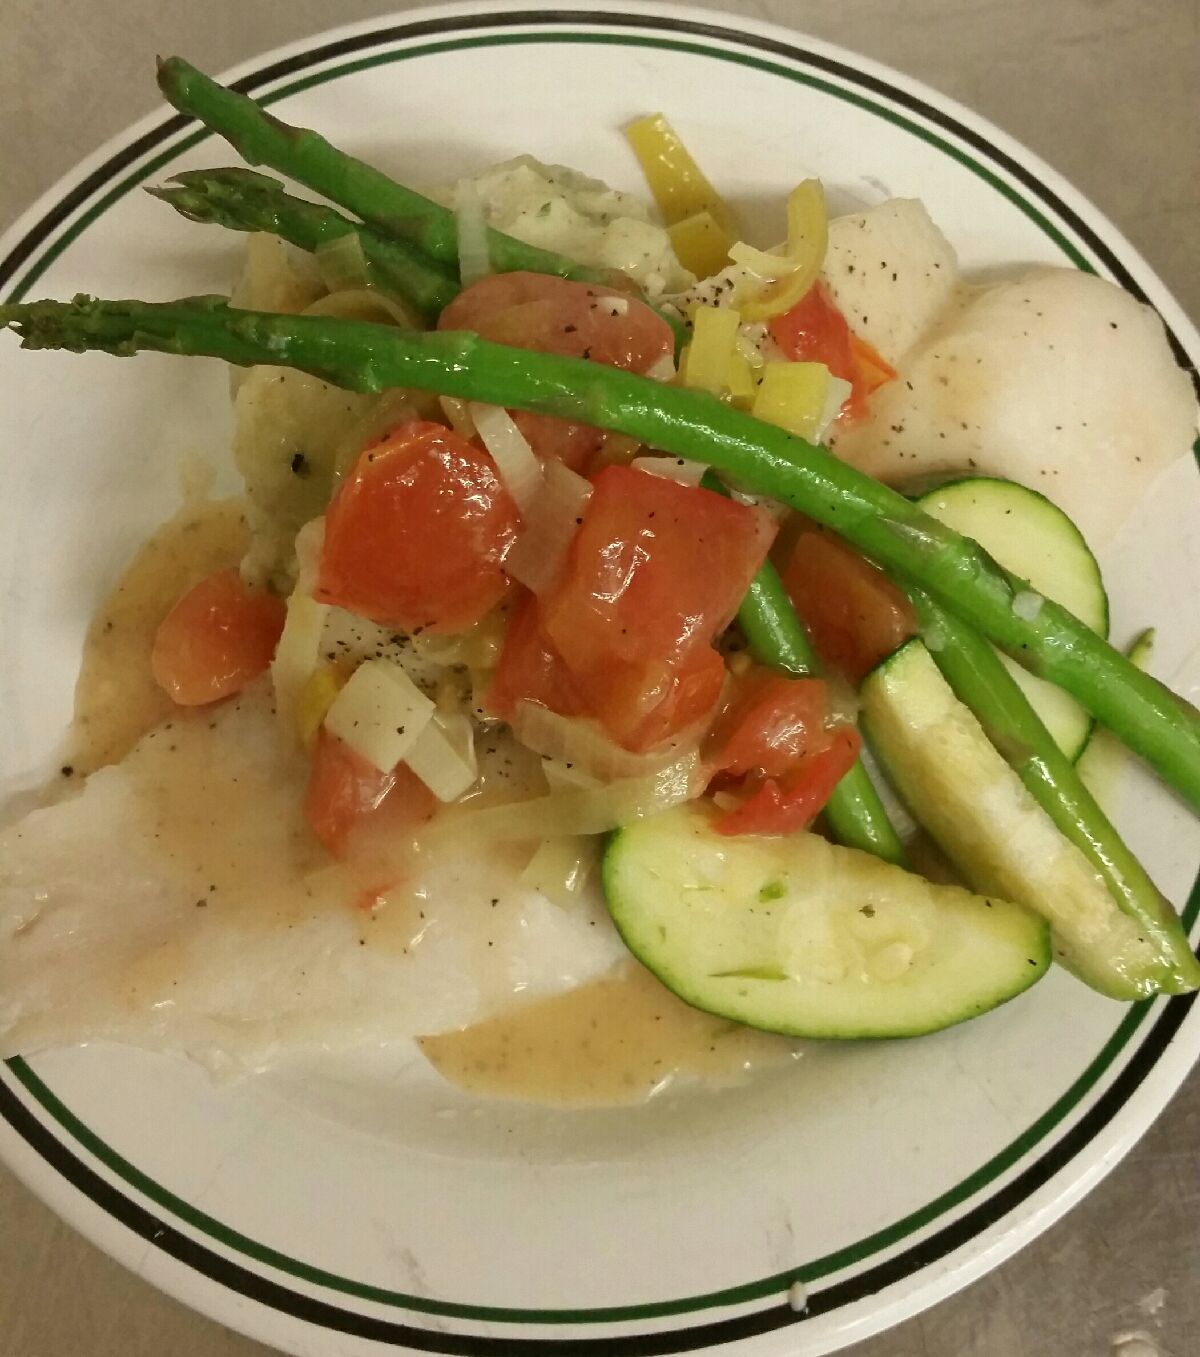 Roasted fish with tomato and leek sauce, asparagus and mashed potatos